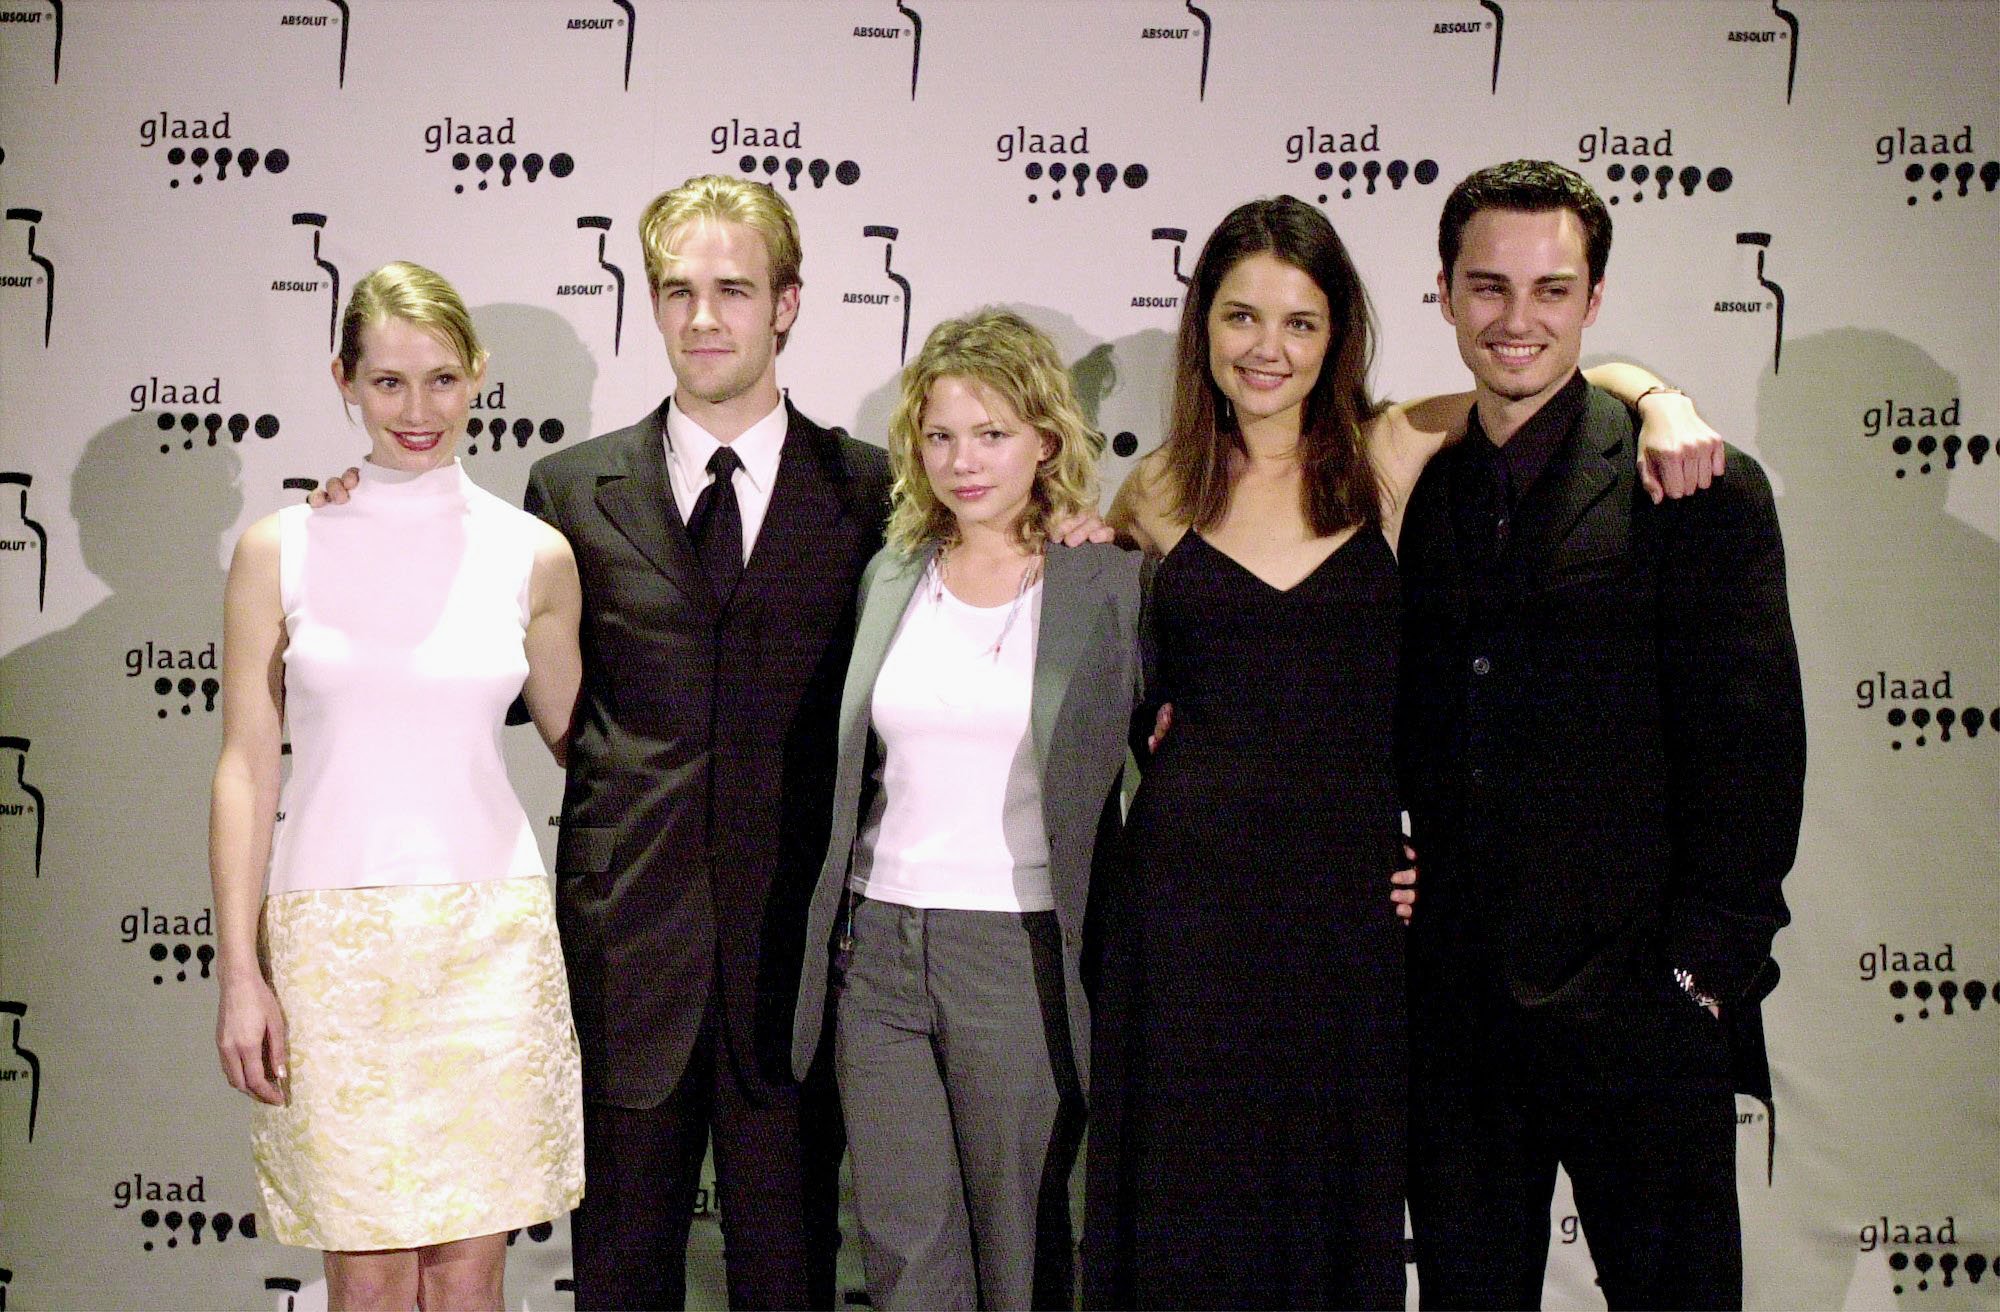 (L-R) Meredith Monroe, James Van der Beek, Michelle Williams, Katie Holmes, and Kerr Smith smiling in front of a white backgrounf